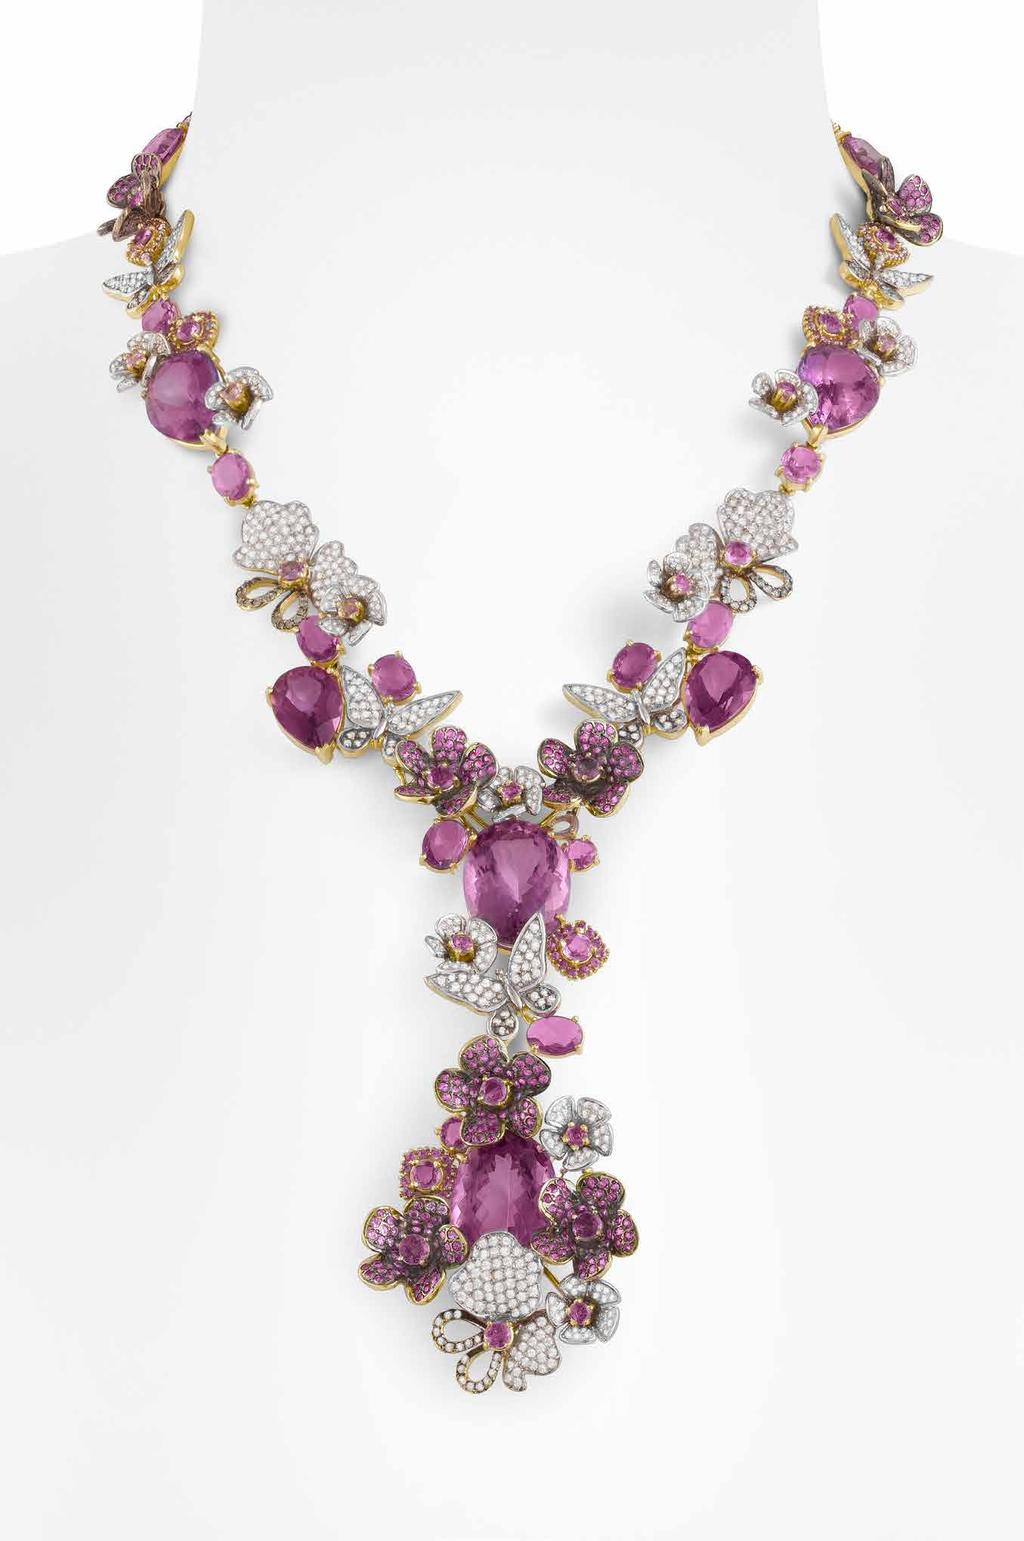 www.goldesignjoias.com.br Necklace in 18K yellow and white gold with pink sapphires and diamonds. POA.